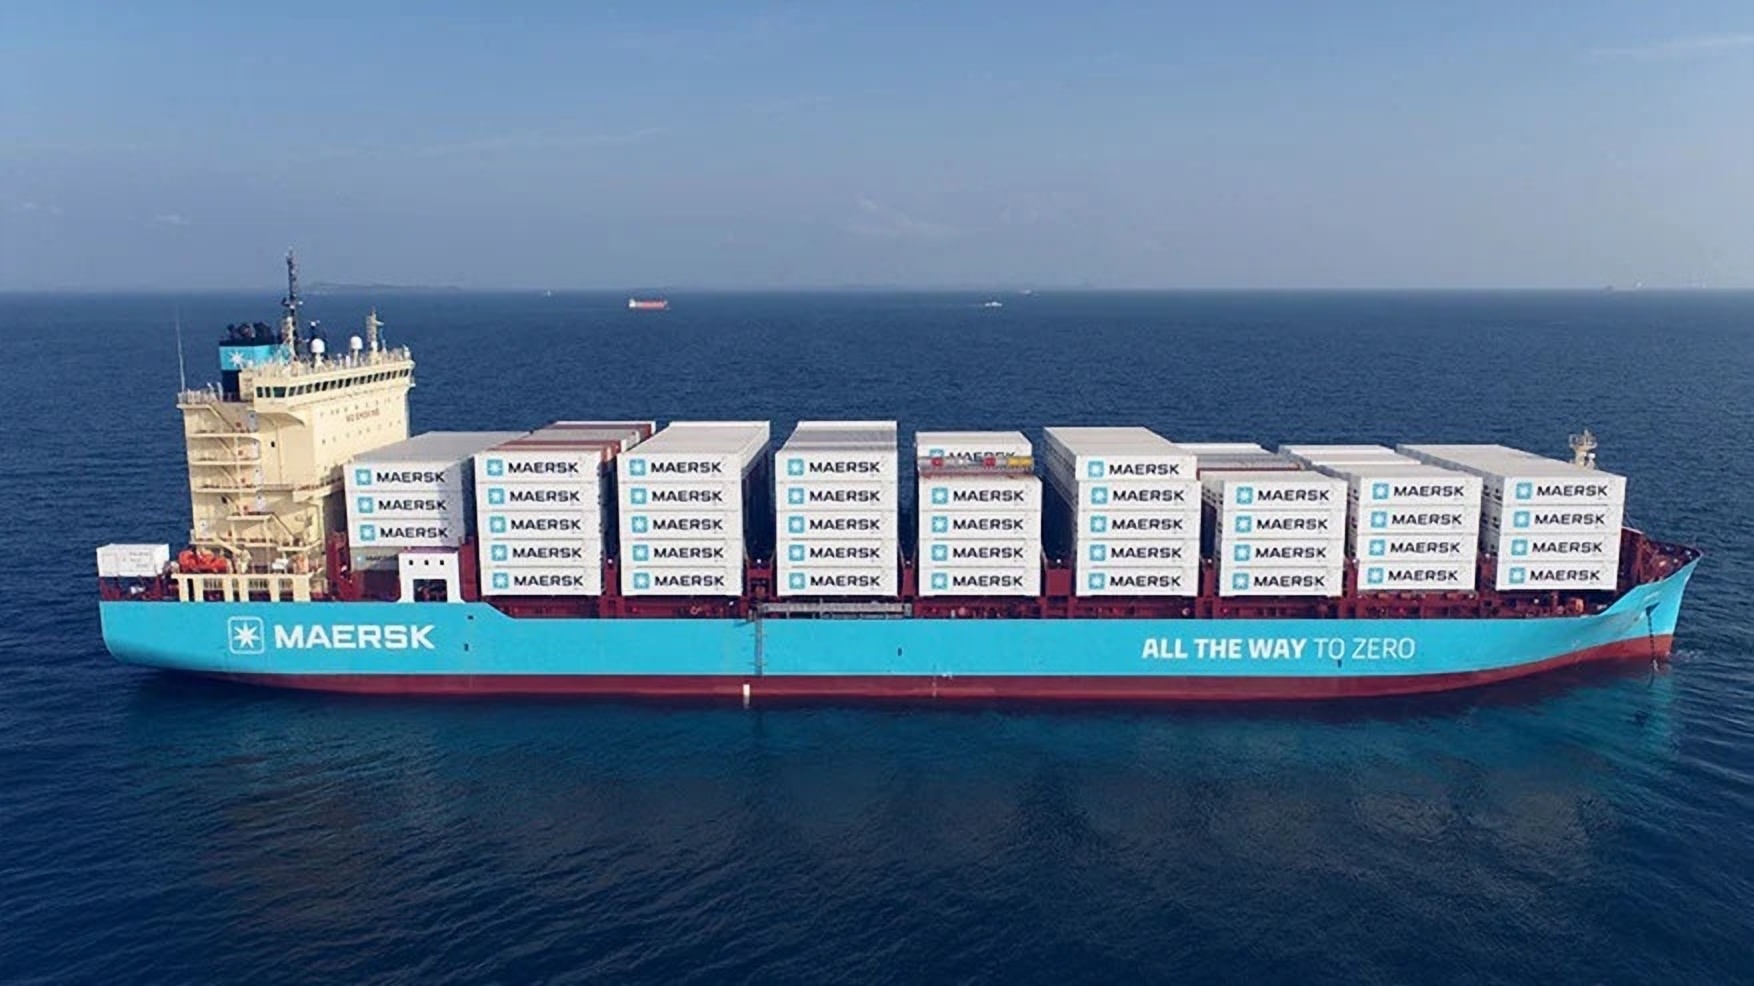 KnowESG_Maersk-Amazon to Ship 20k Containers with Green Fuel